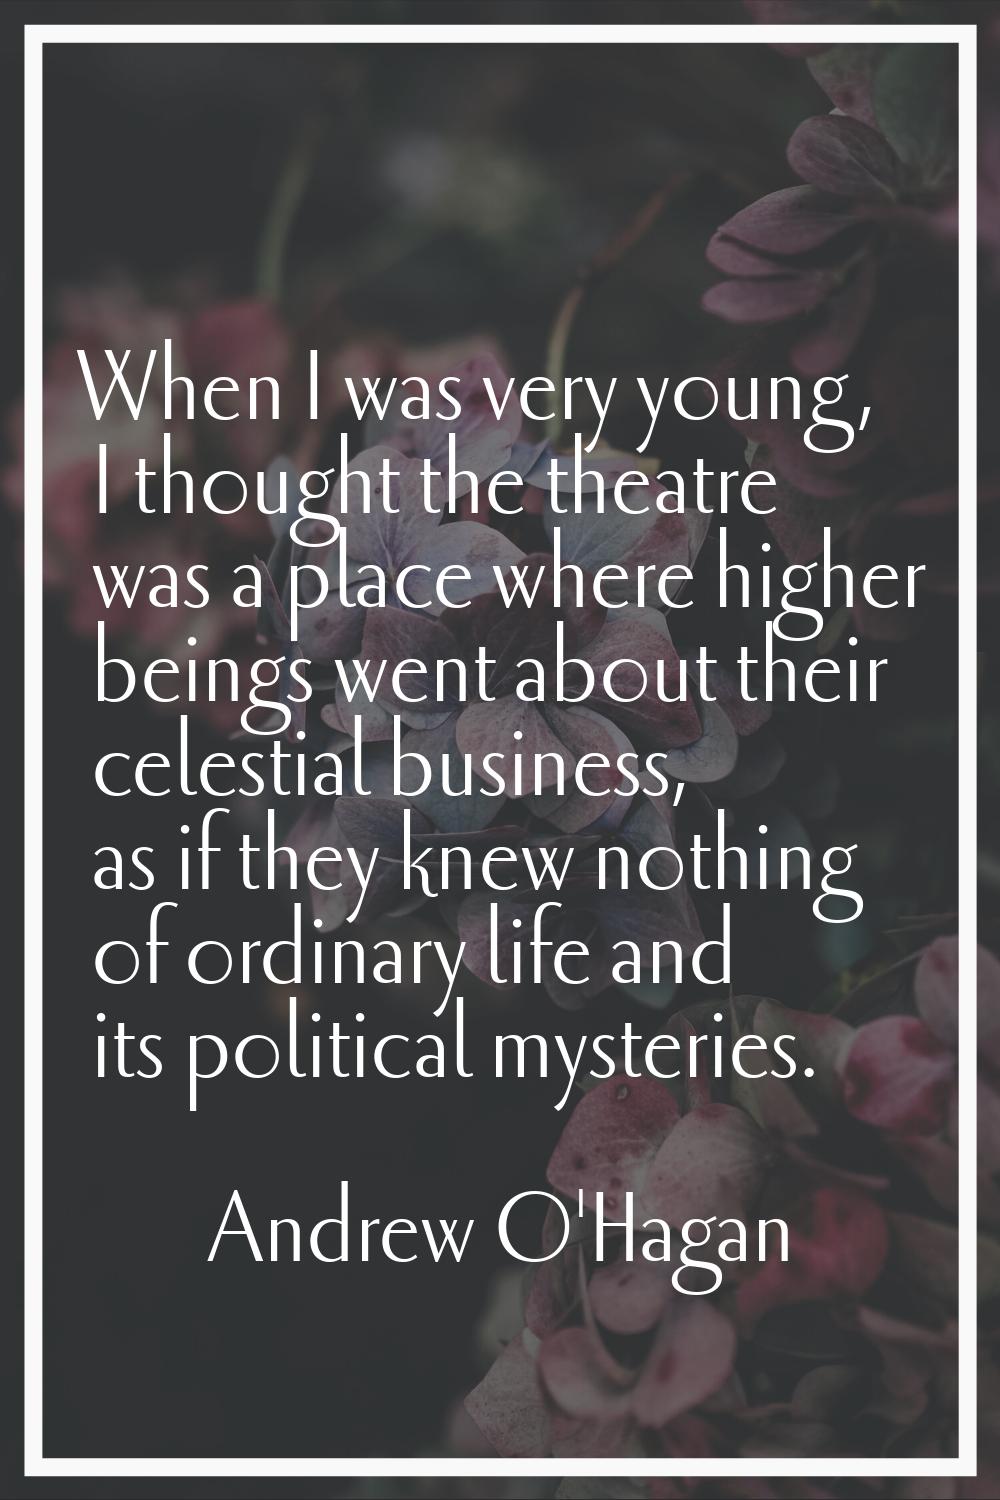 When I was very young, I thought the theatre was a place where higher beings went about their celes